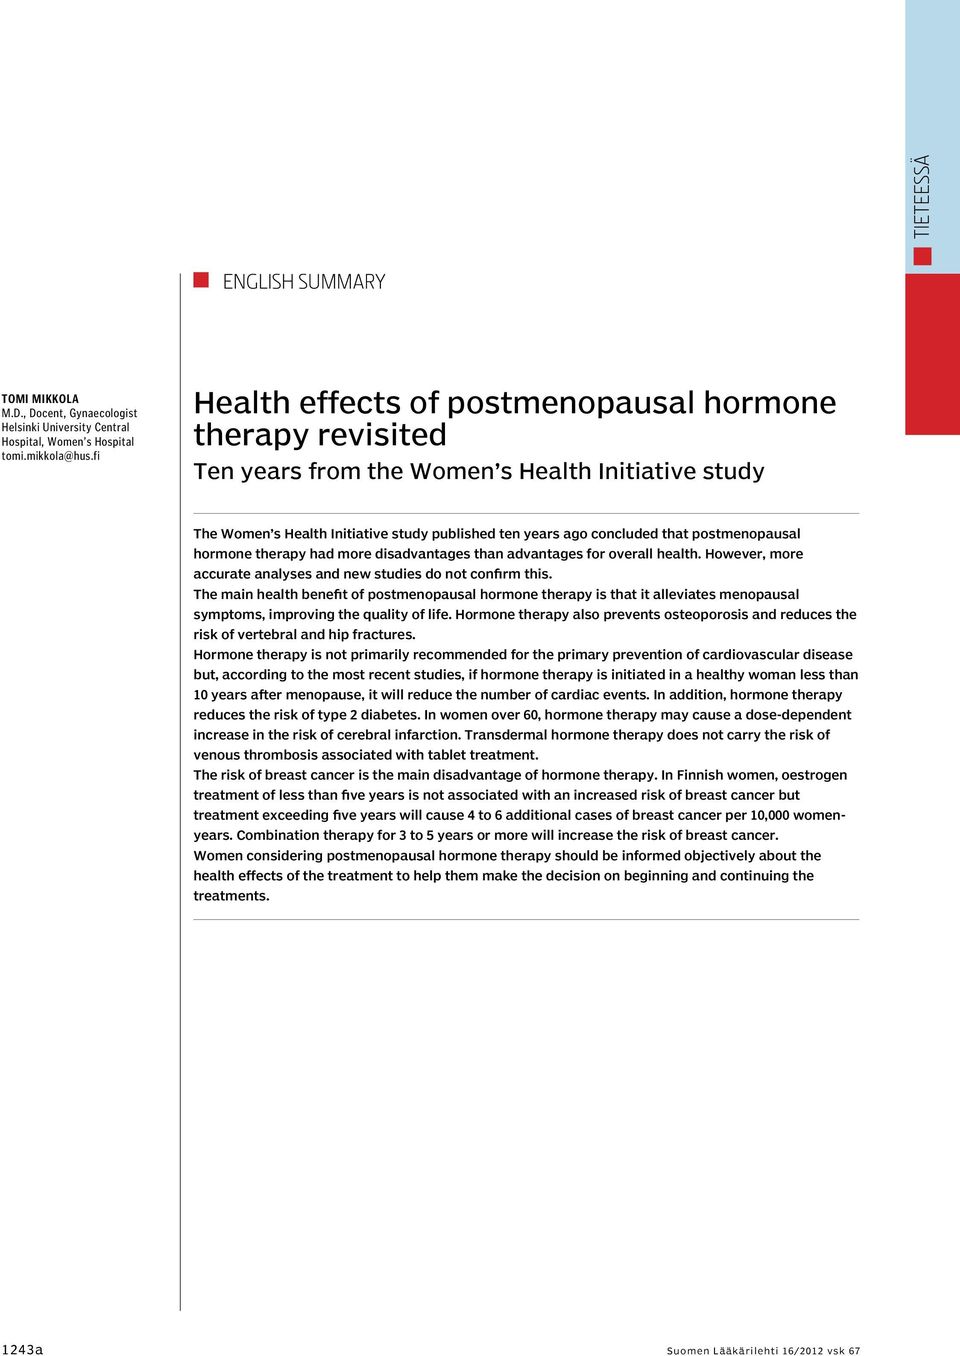 postmenopausal hormone therapy had more disadvantages than advantages for overall health. However, more accurate analyses and new studies do not confirm this.